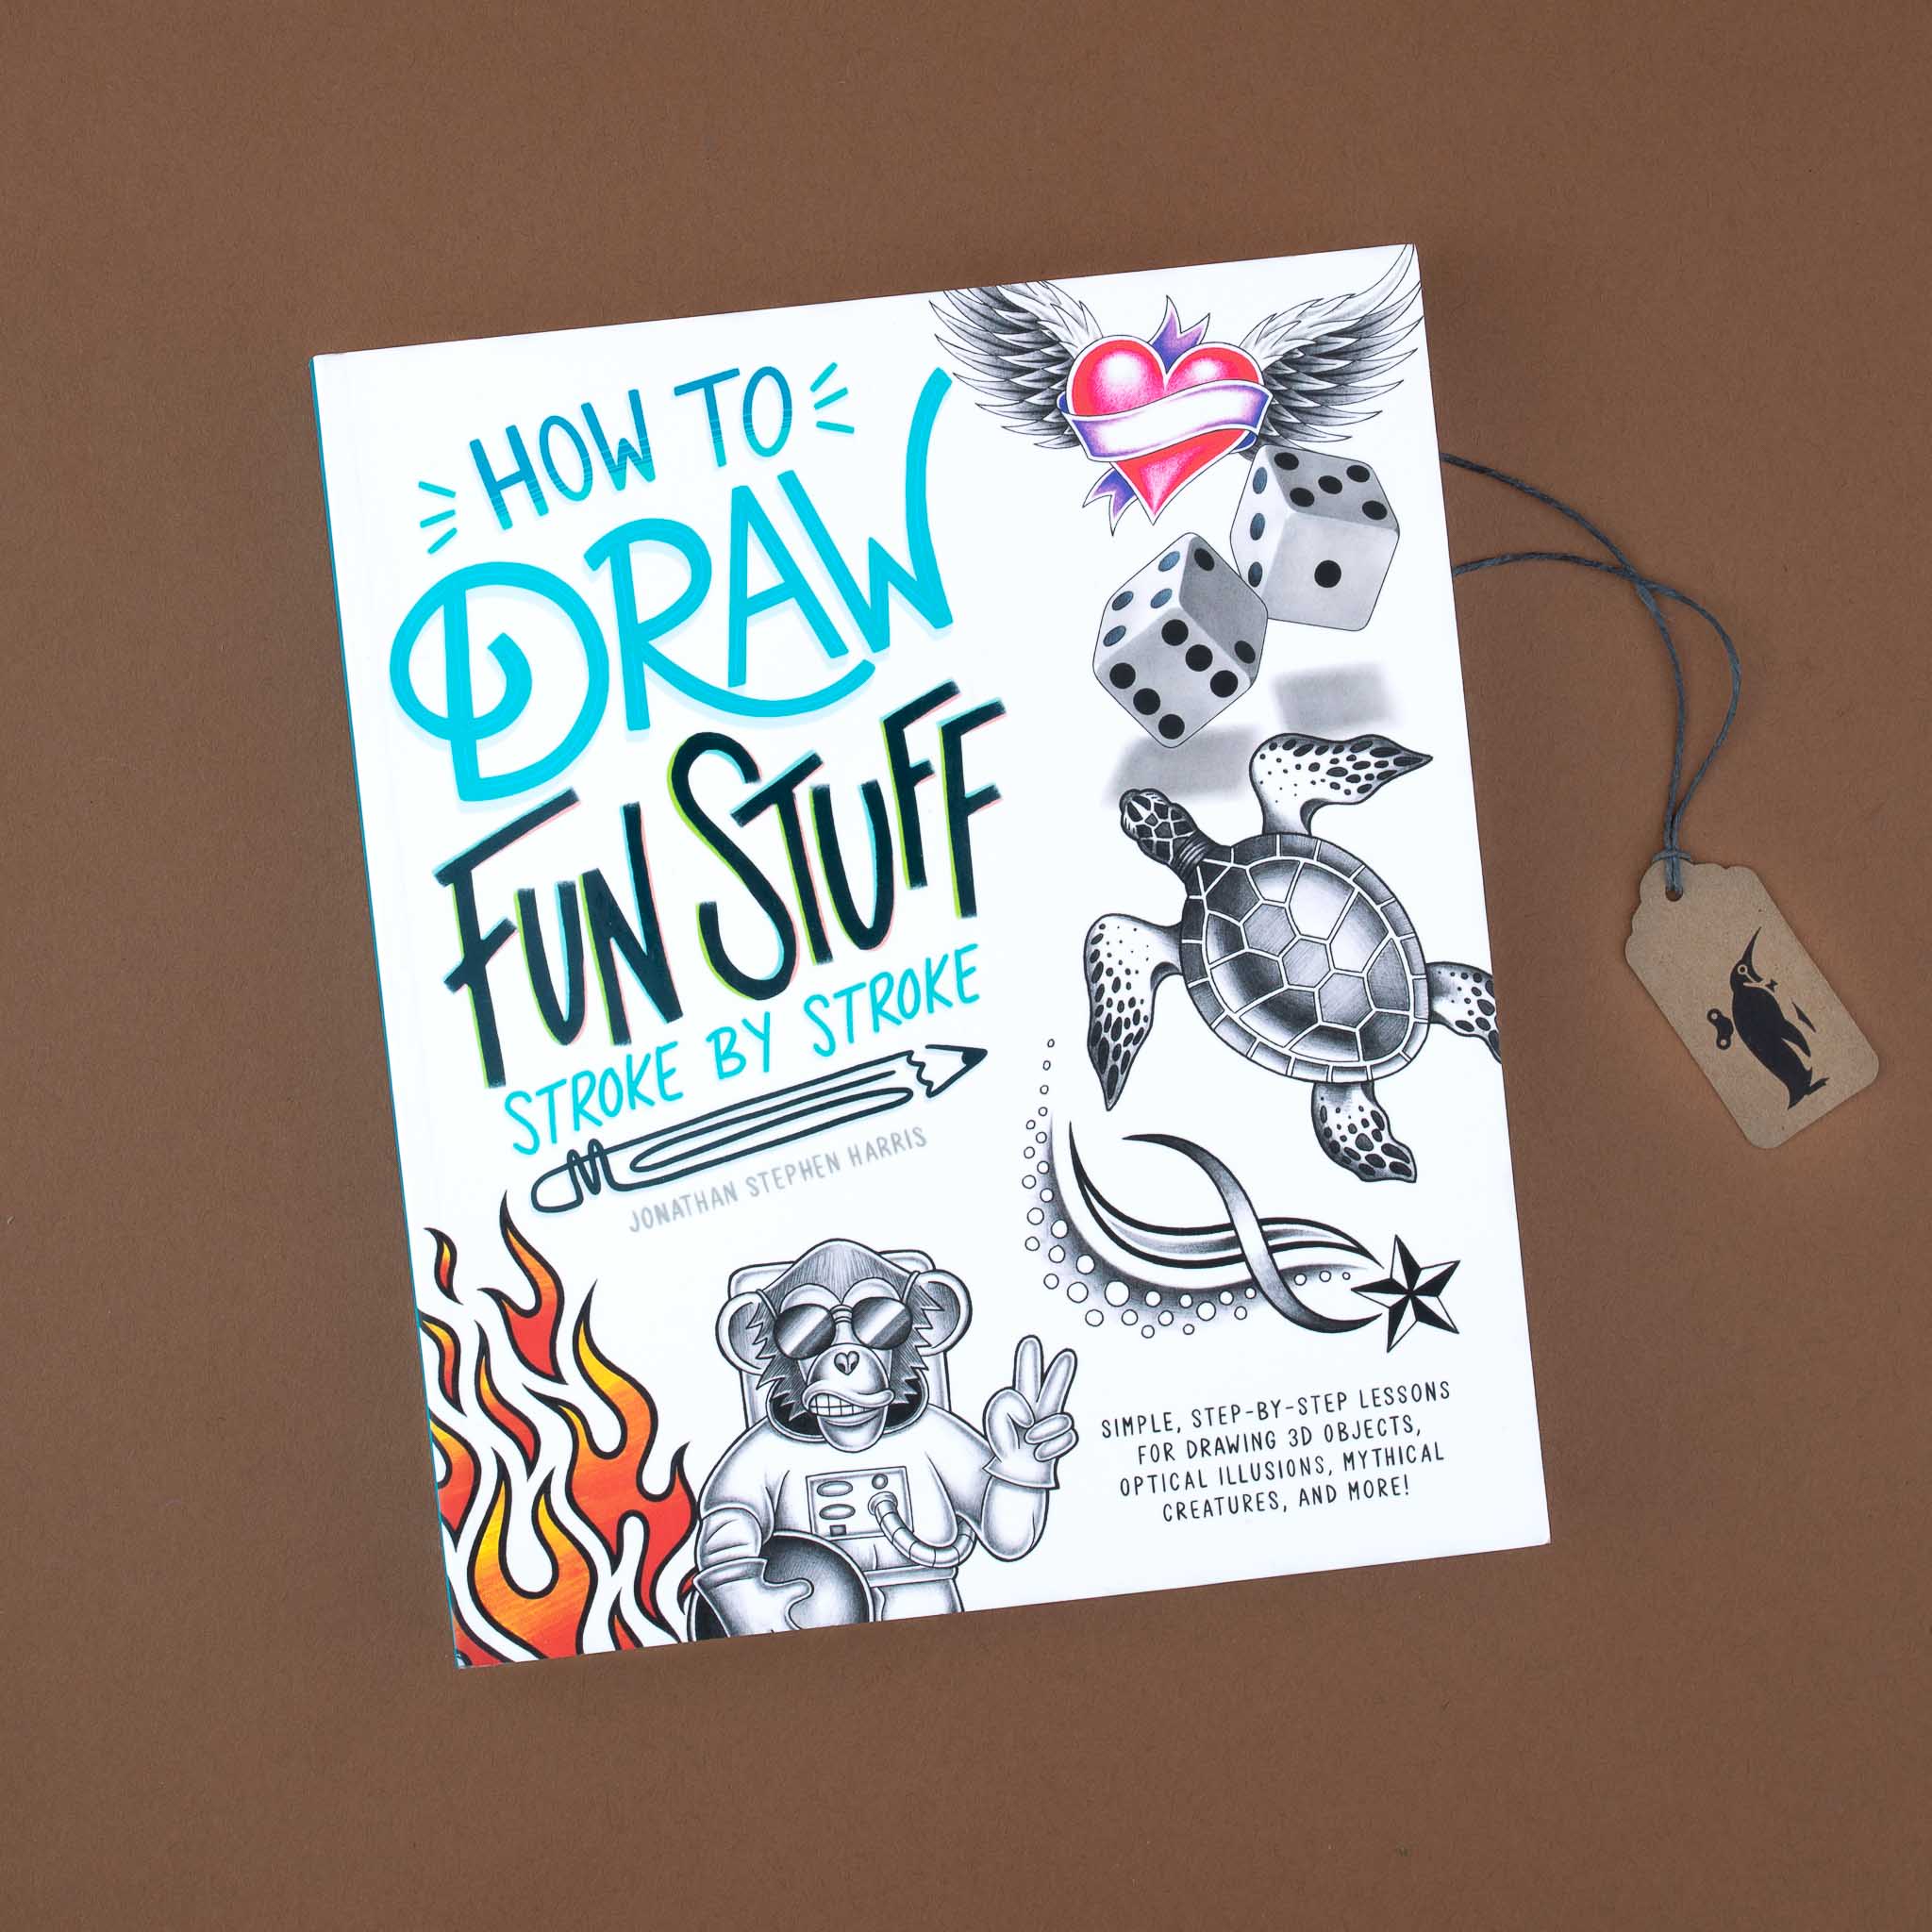 how to draw a cool picture